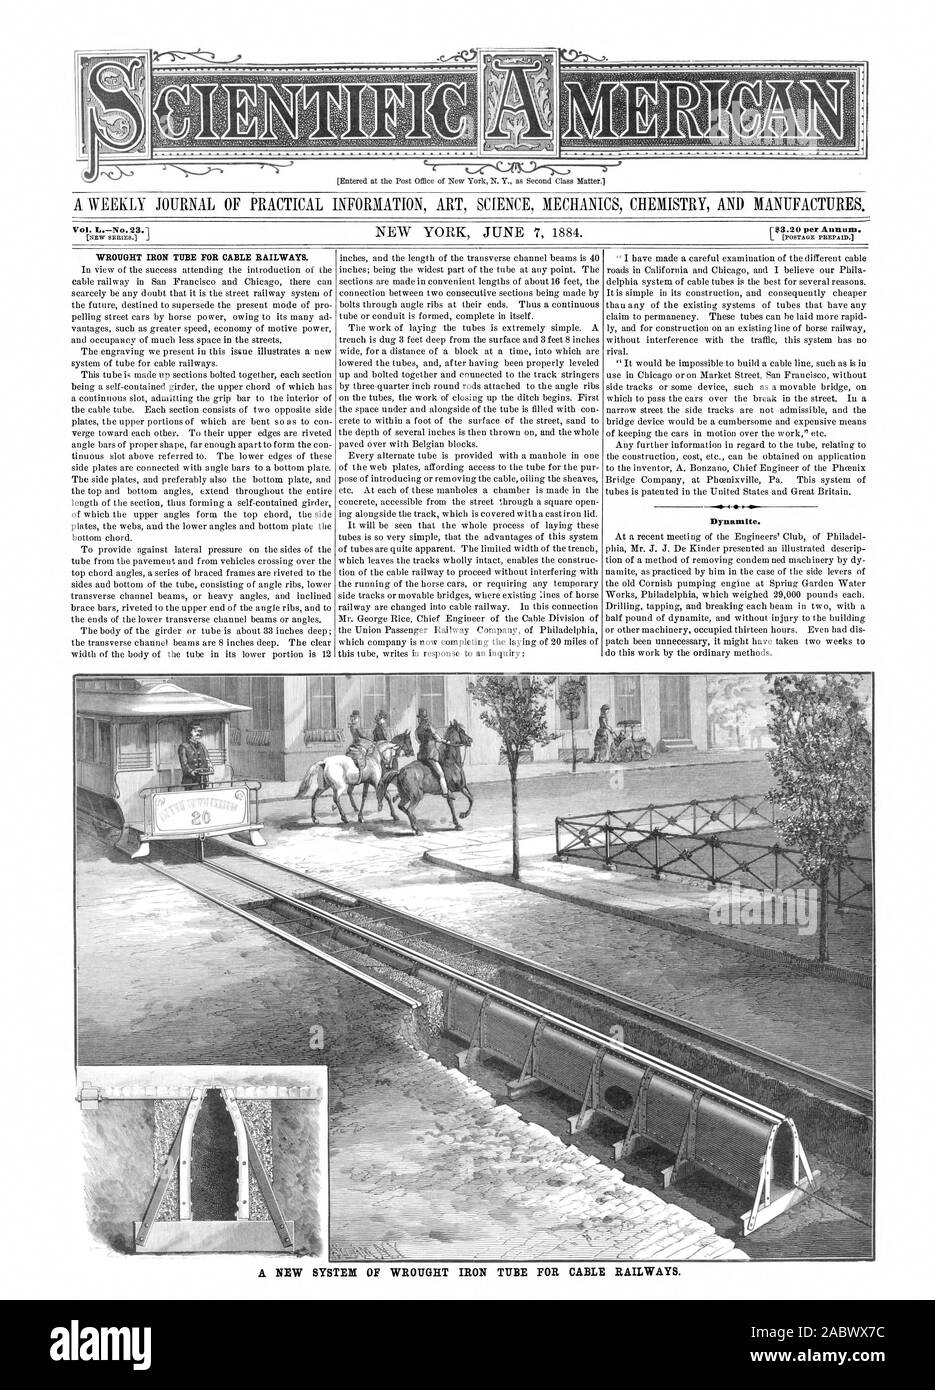 A WEEKLY JOURNAL OF PRACTICAL INFORMATION ART SCIENCE MECHANICS CHEMISTRY AND MANUFACTURES. Vol. No. 23.1 WROUGHT IRON TUBE FOR CABLE RAILWAYS. Dynamite. A NEW SYSTEM OF WROUGHT IRON TUBE FOR CABLE RAILWAYS., scientific american, 1884-06-07 Stock Photo